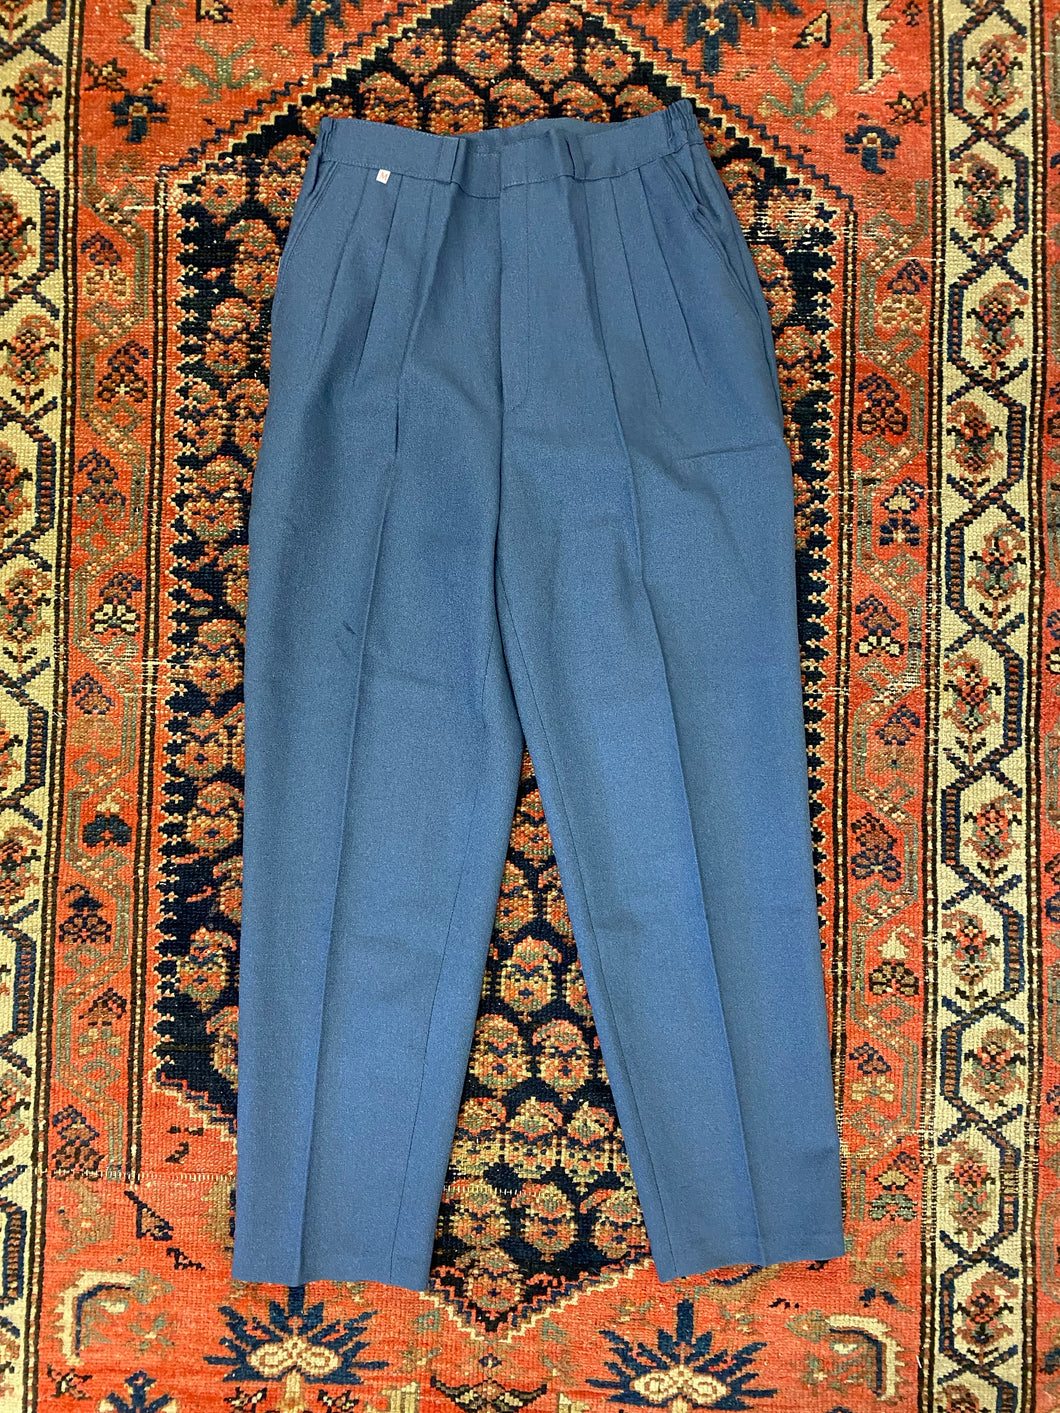 90s Blue Valentino Trousers - 26-28inches